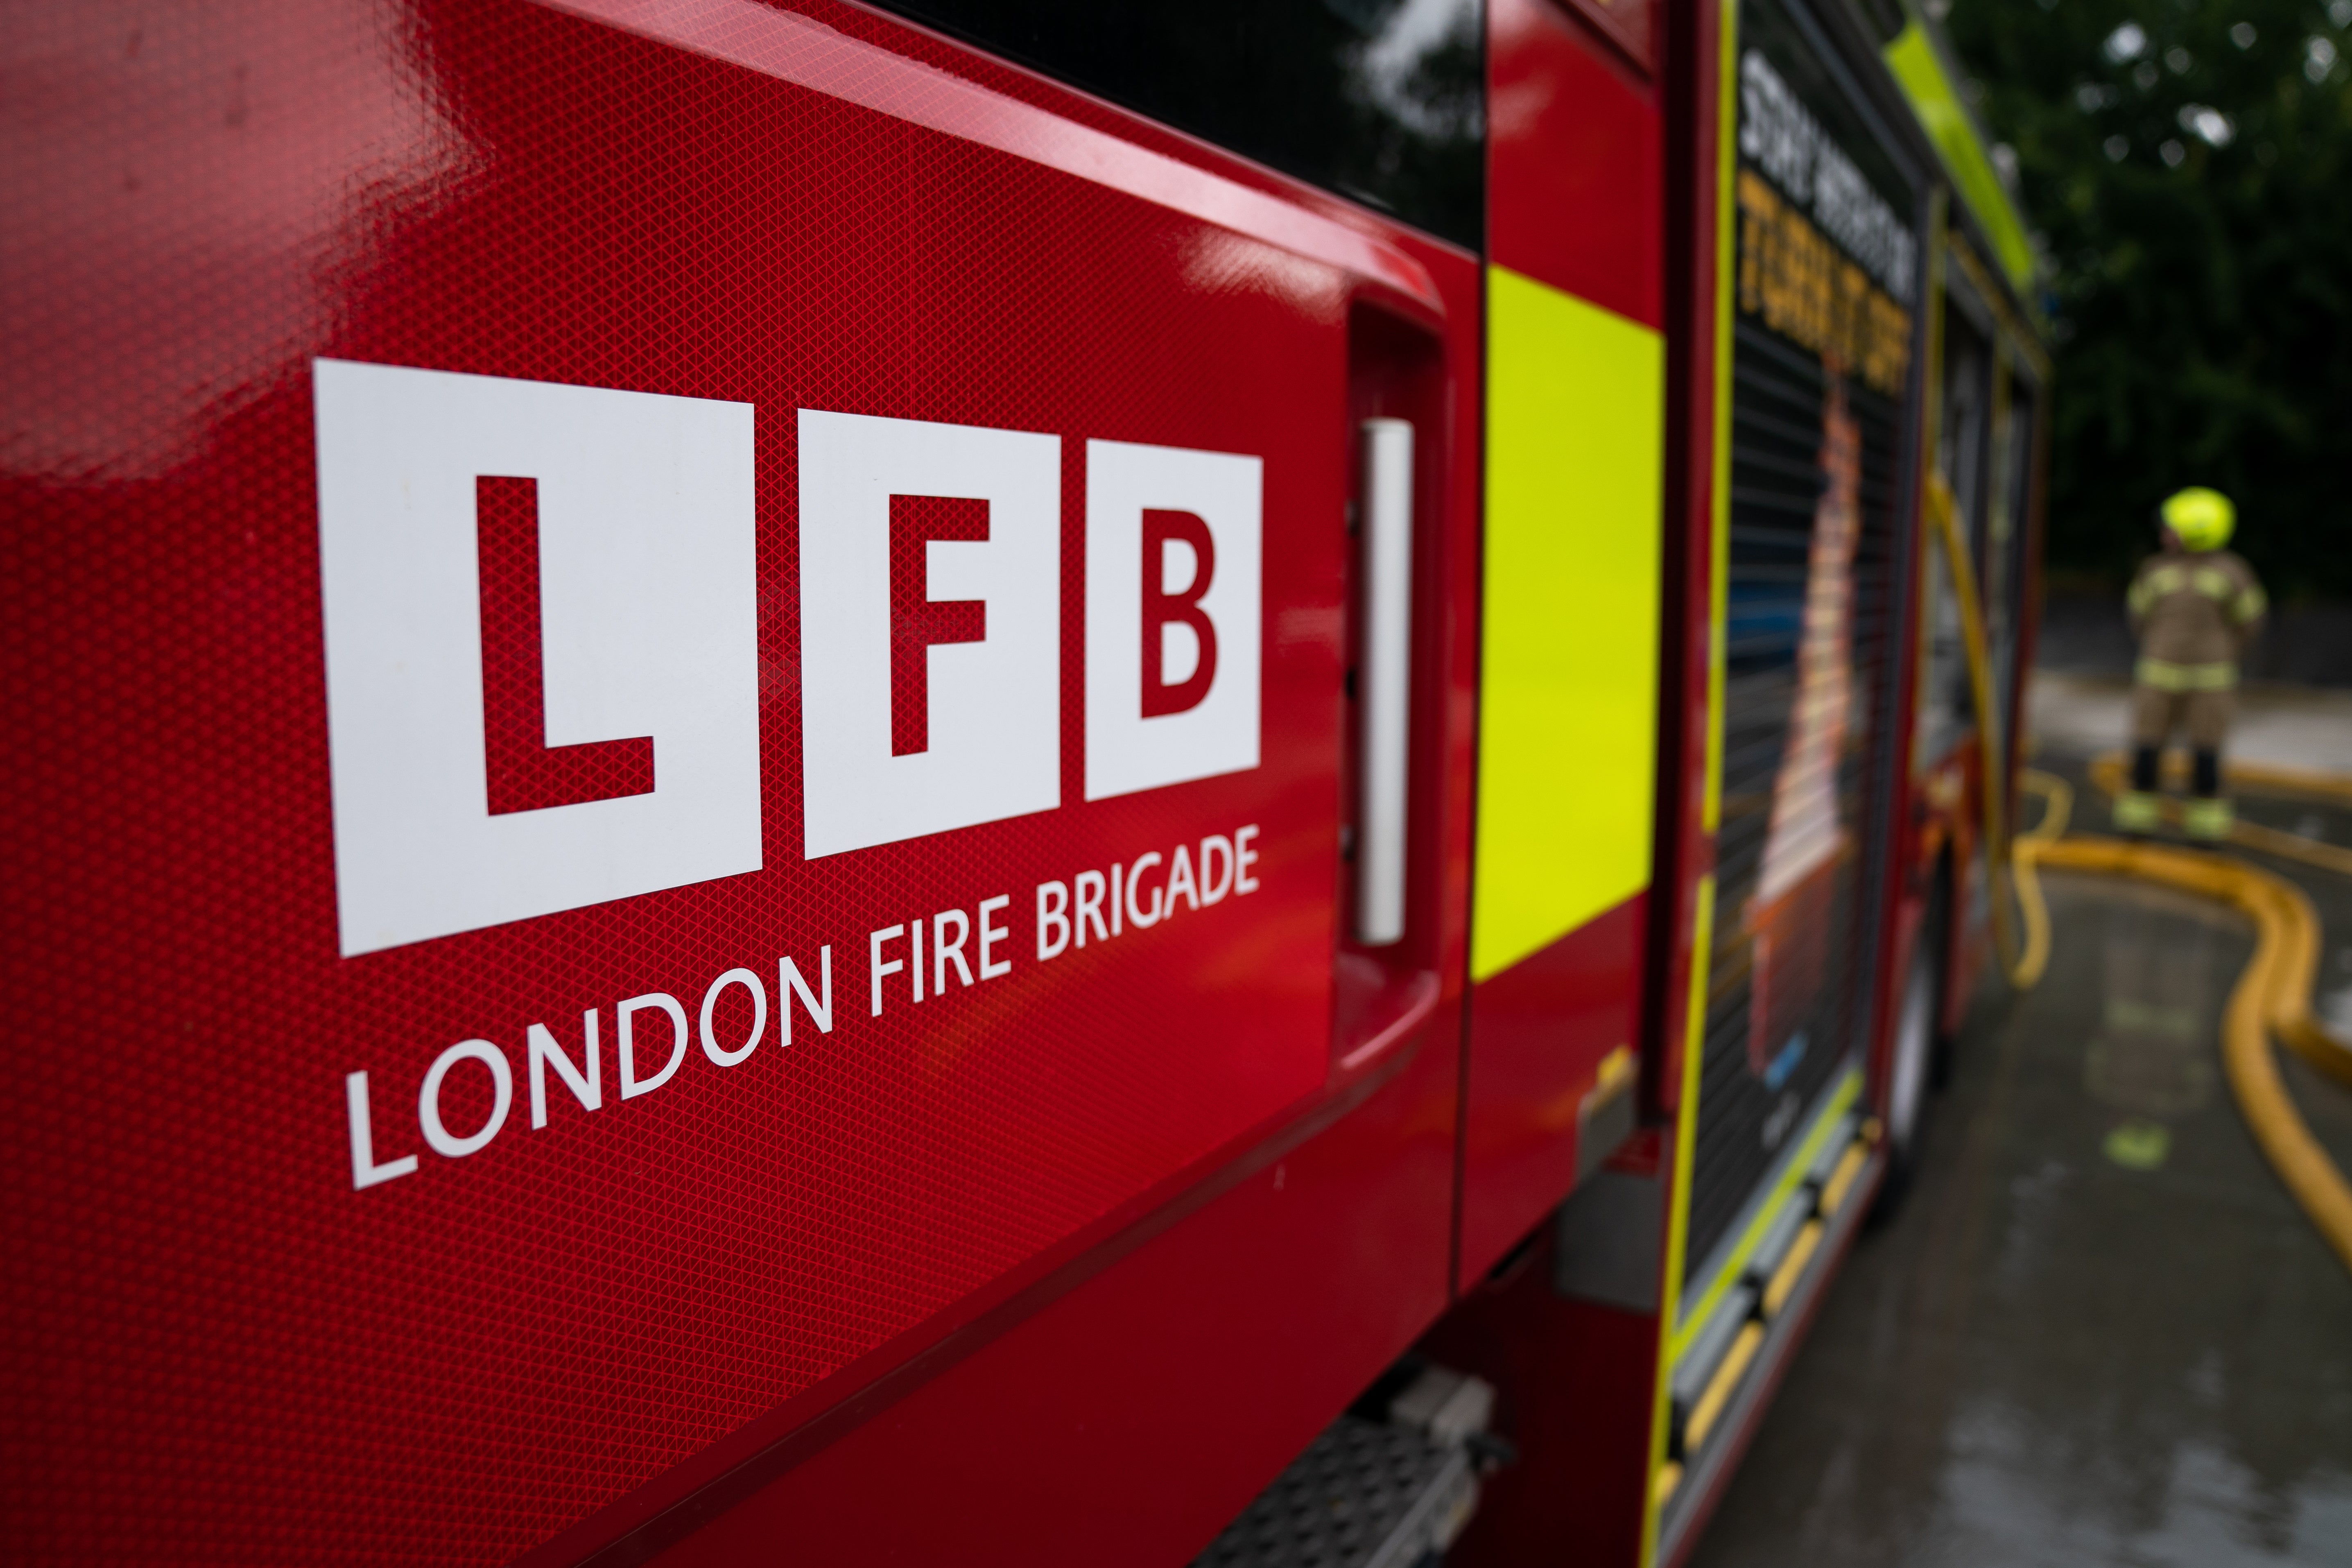 The woman was charged following a suspected arson in an east London home (Aaron Chown/PA)